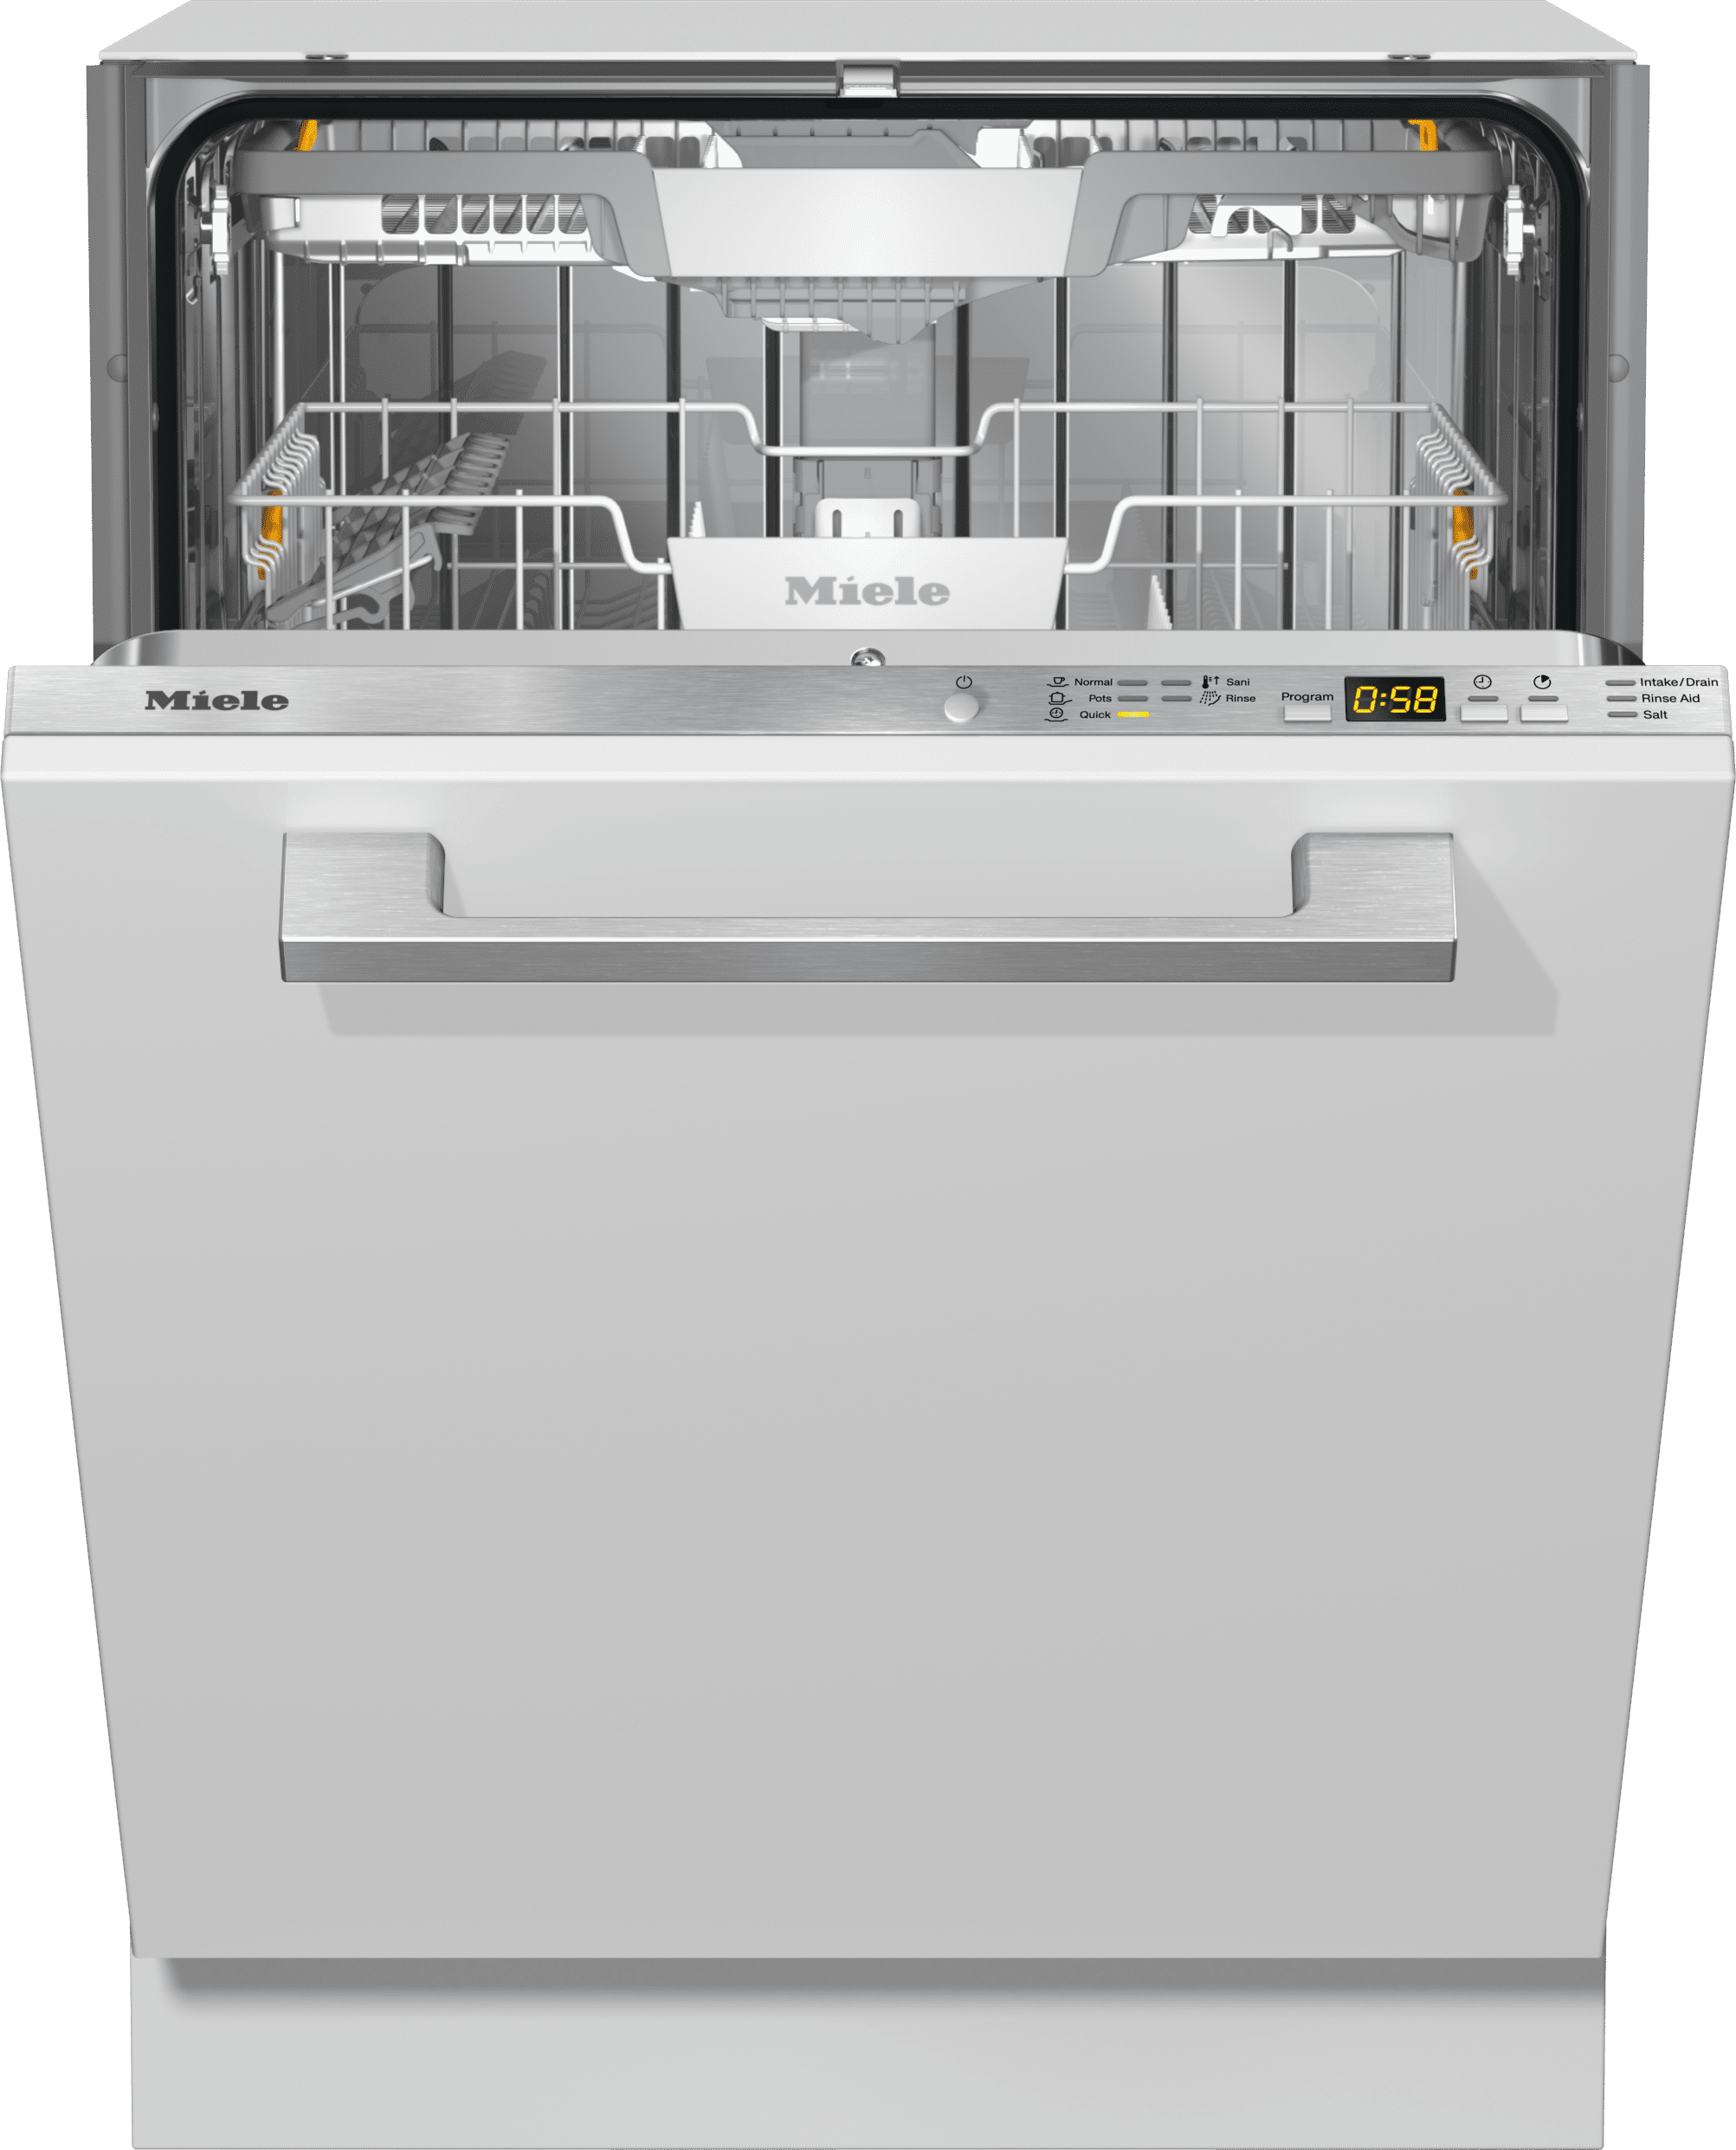 Miele G5266SCVI STAINLESS STEEL G 5266 Scvi - Fully Integrated Dishwashers For Optimum Drying Results Thanks To Autoopen Drying.